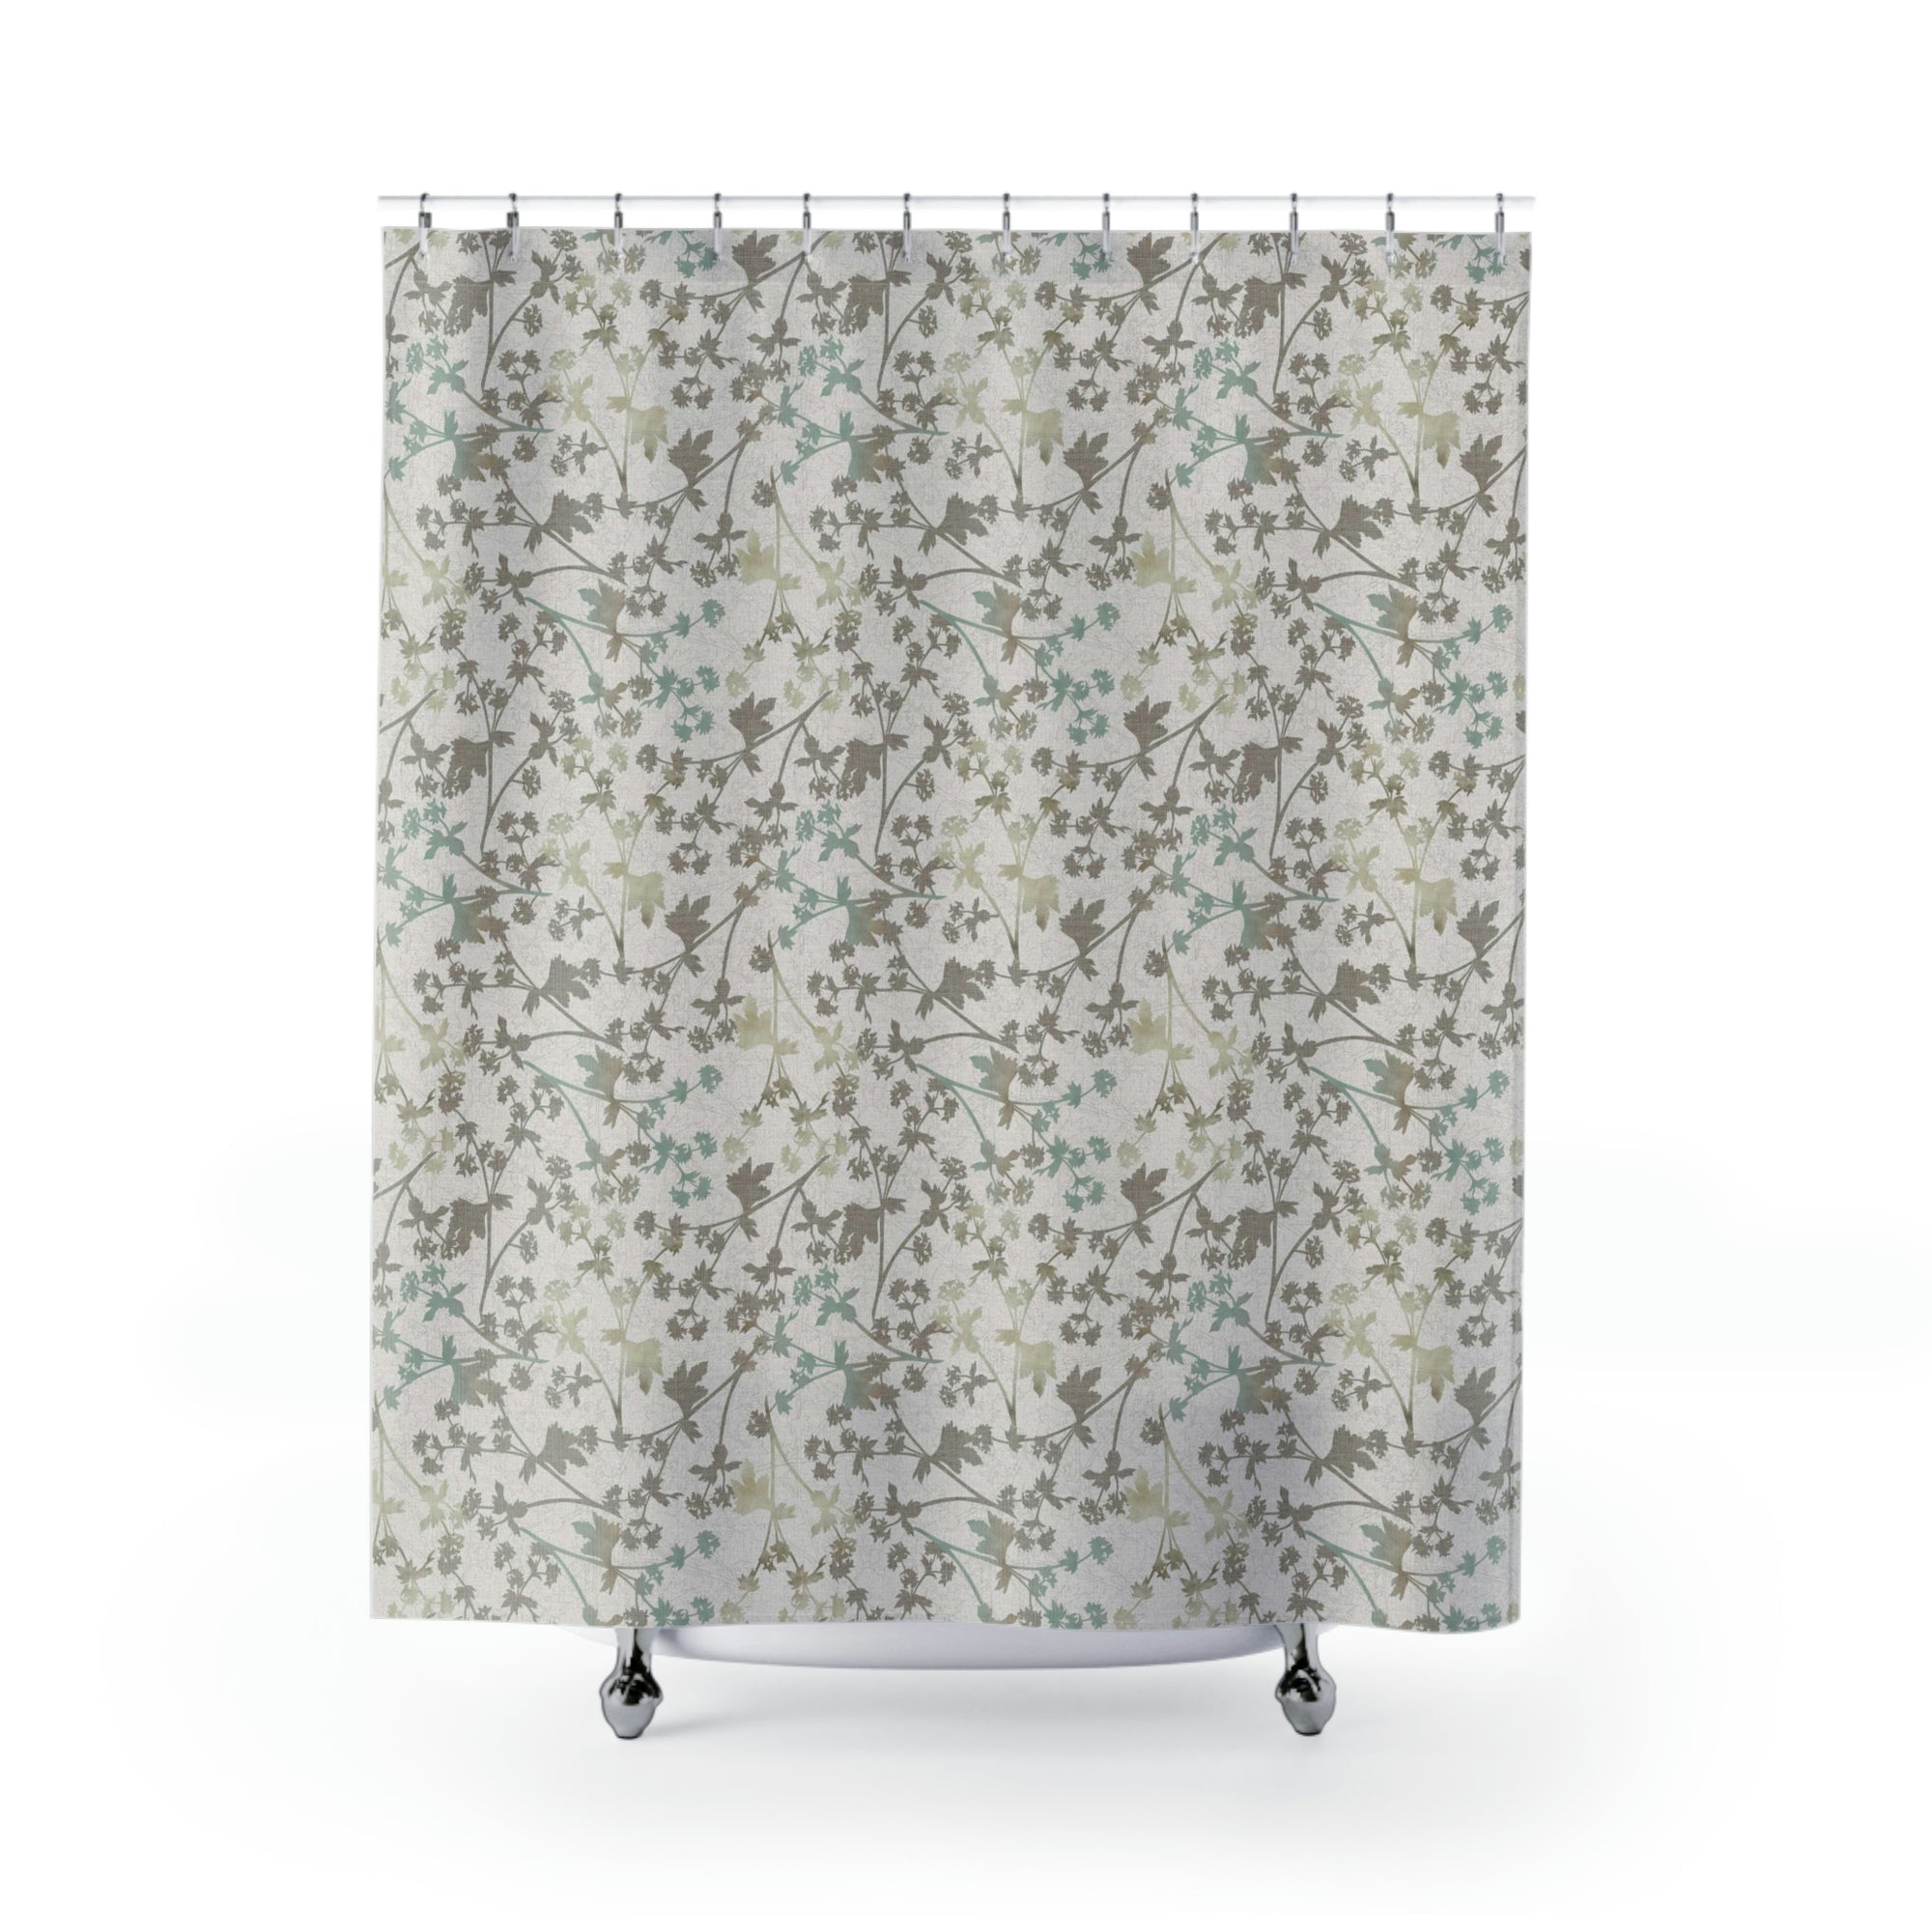 Lady's Mantle Shower Curtain in Tan